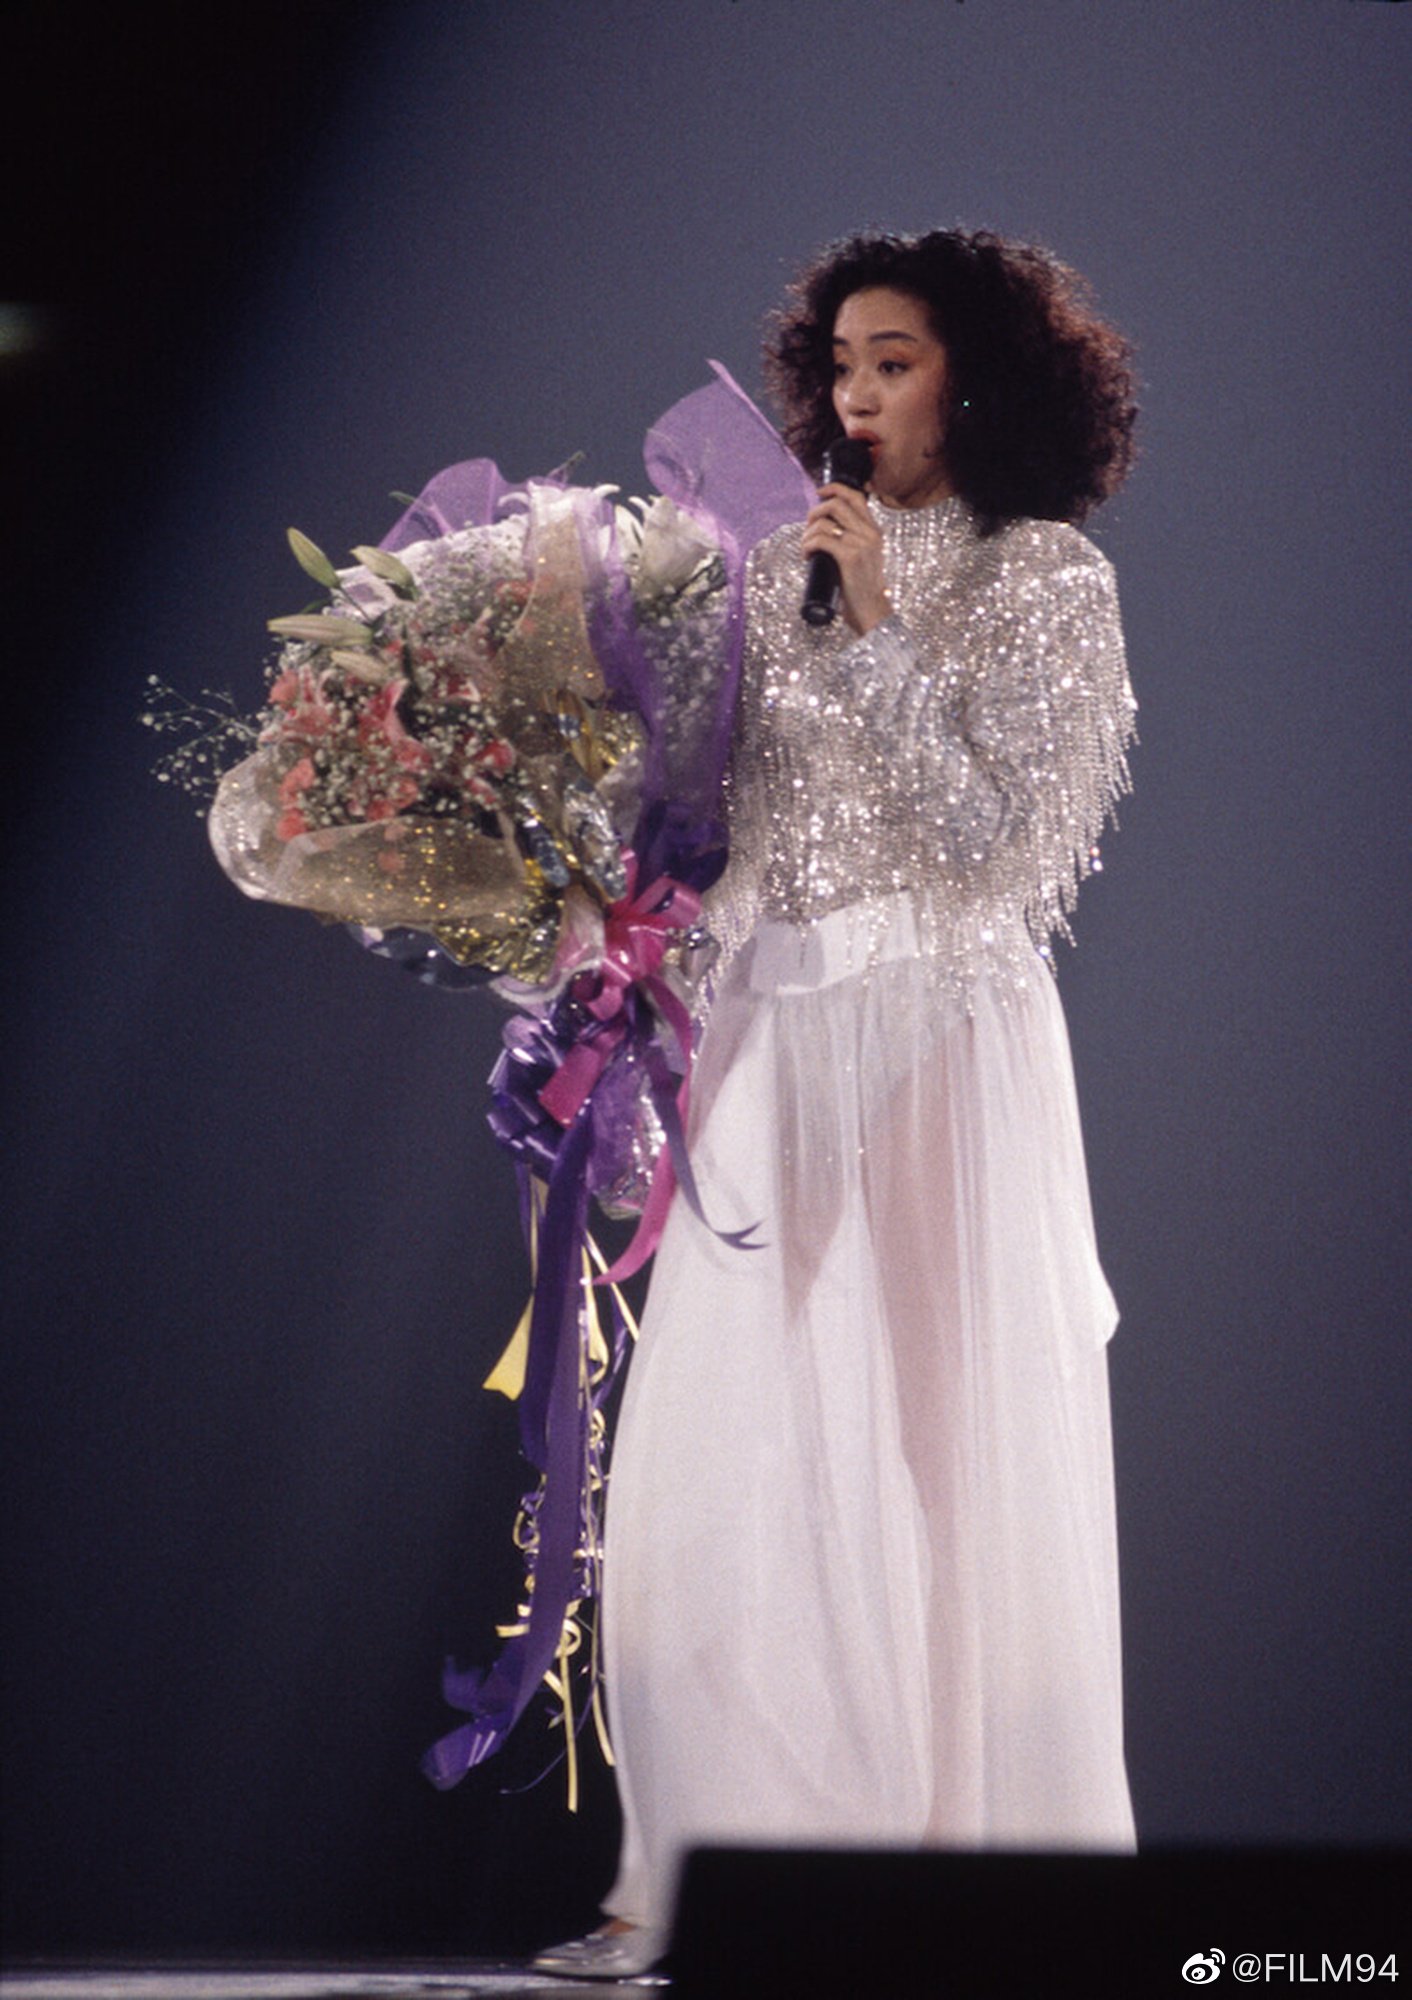 Happy birthday our dearest diva anita mui! your legacy lives on forever and rest easy my love <33 